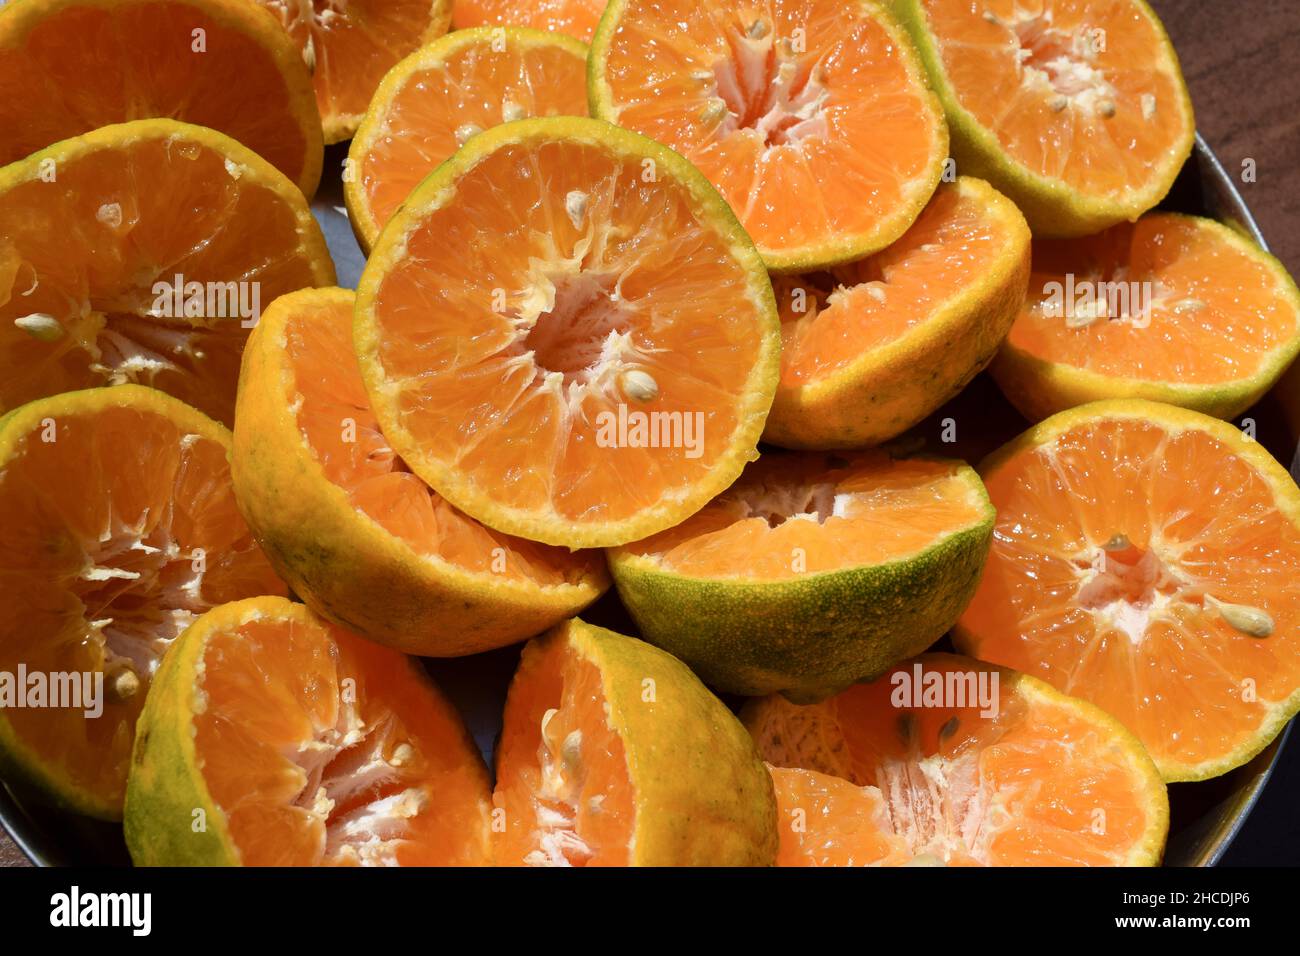 Orange, Malta fruits sliced in to half to take out juice. Grapefruit or limes. Citrus fruits half for juice preparation in juice center. background cl Stock Photo